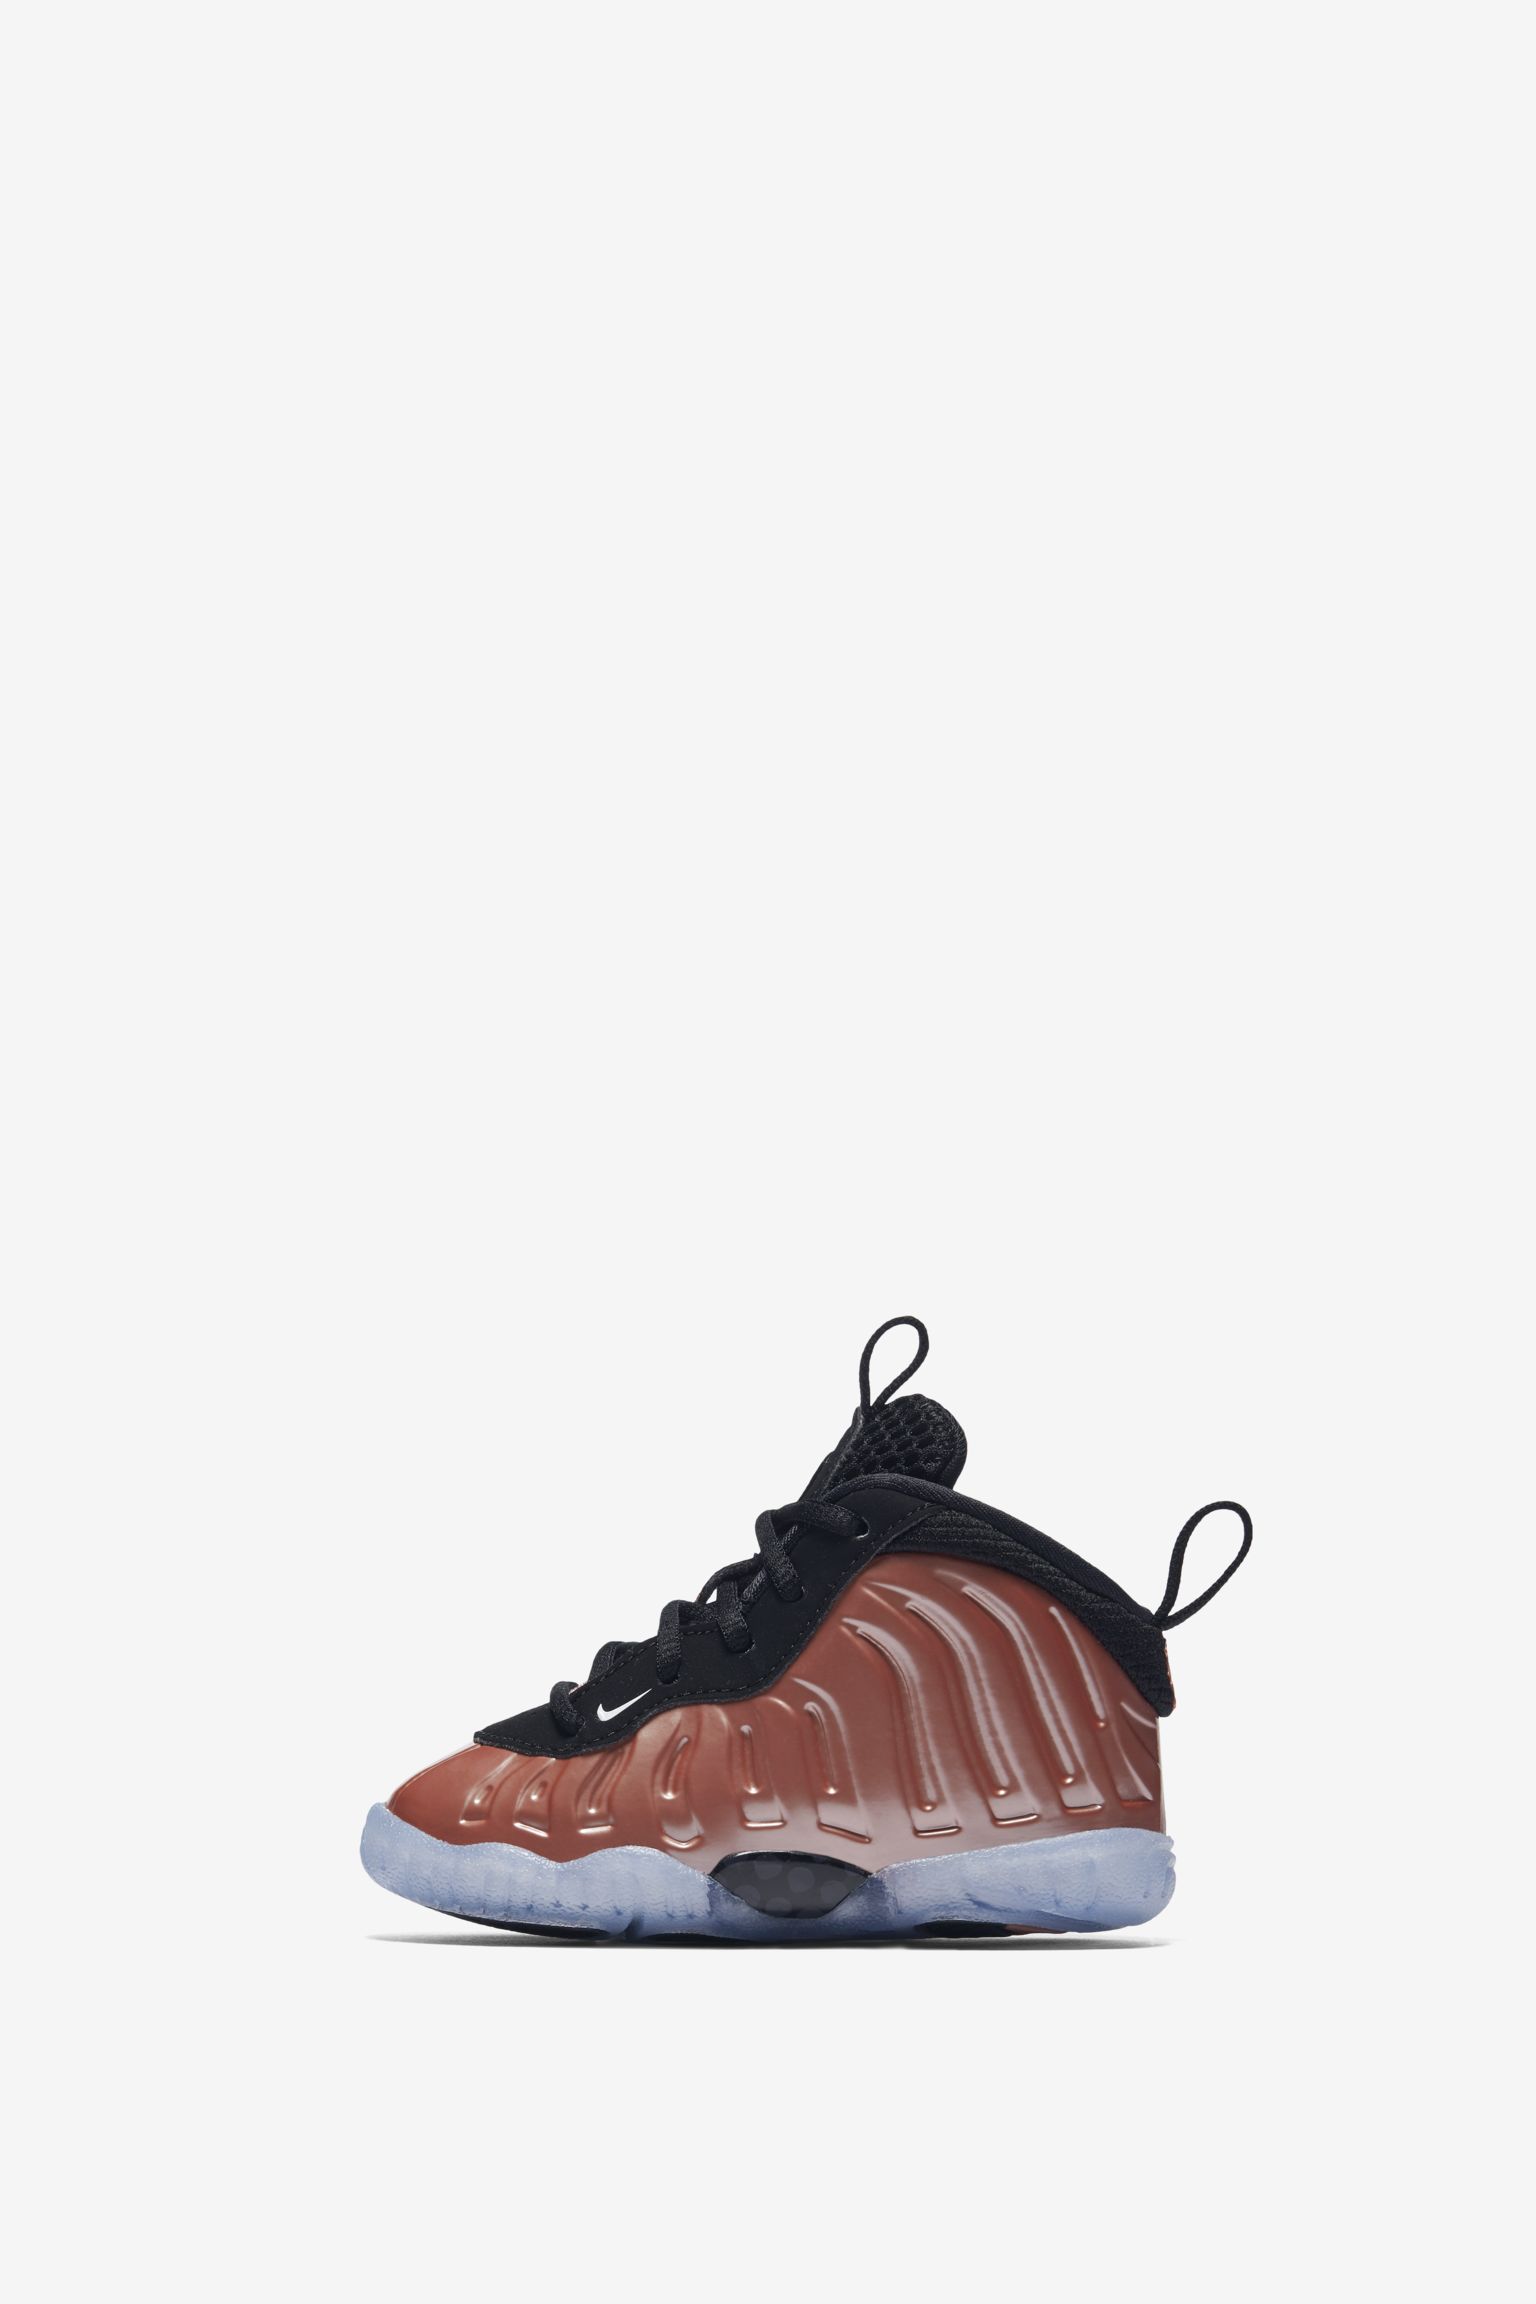 Nike Air Foamposite One 'Rust Pink & White' Release Date. Nike SNKRS